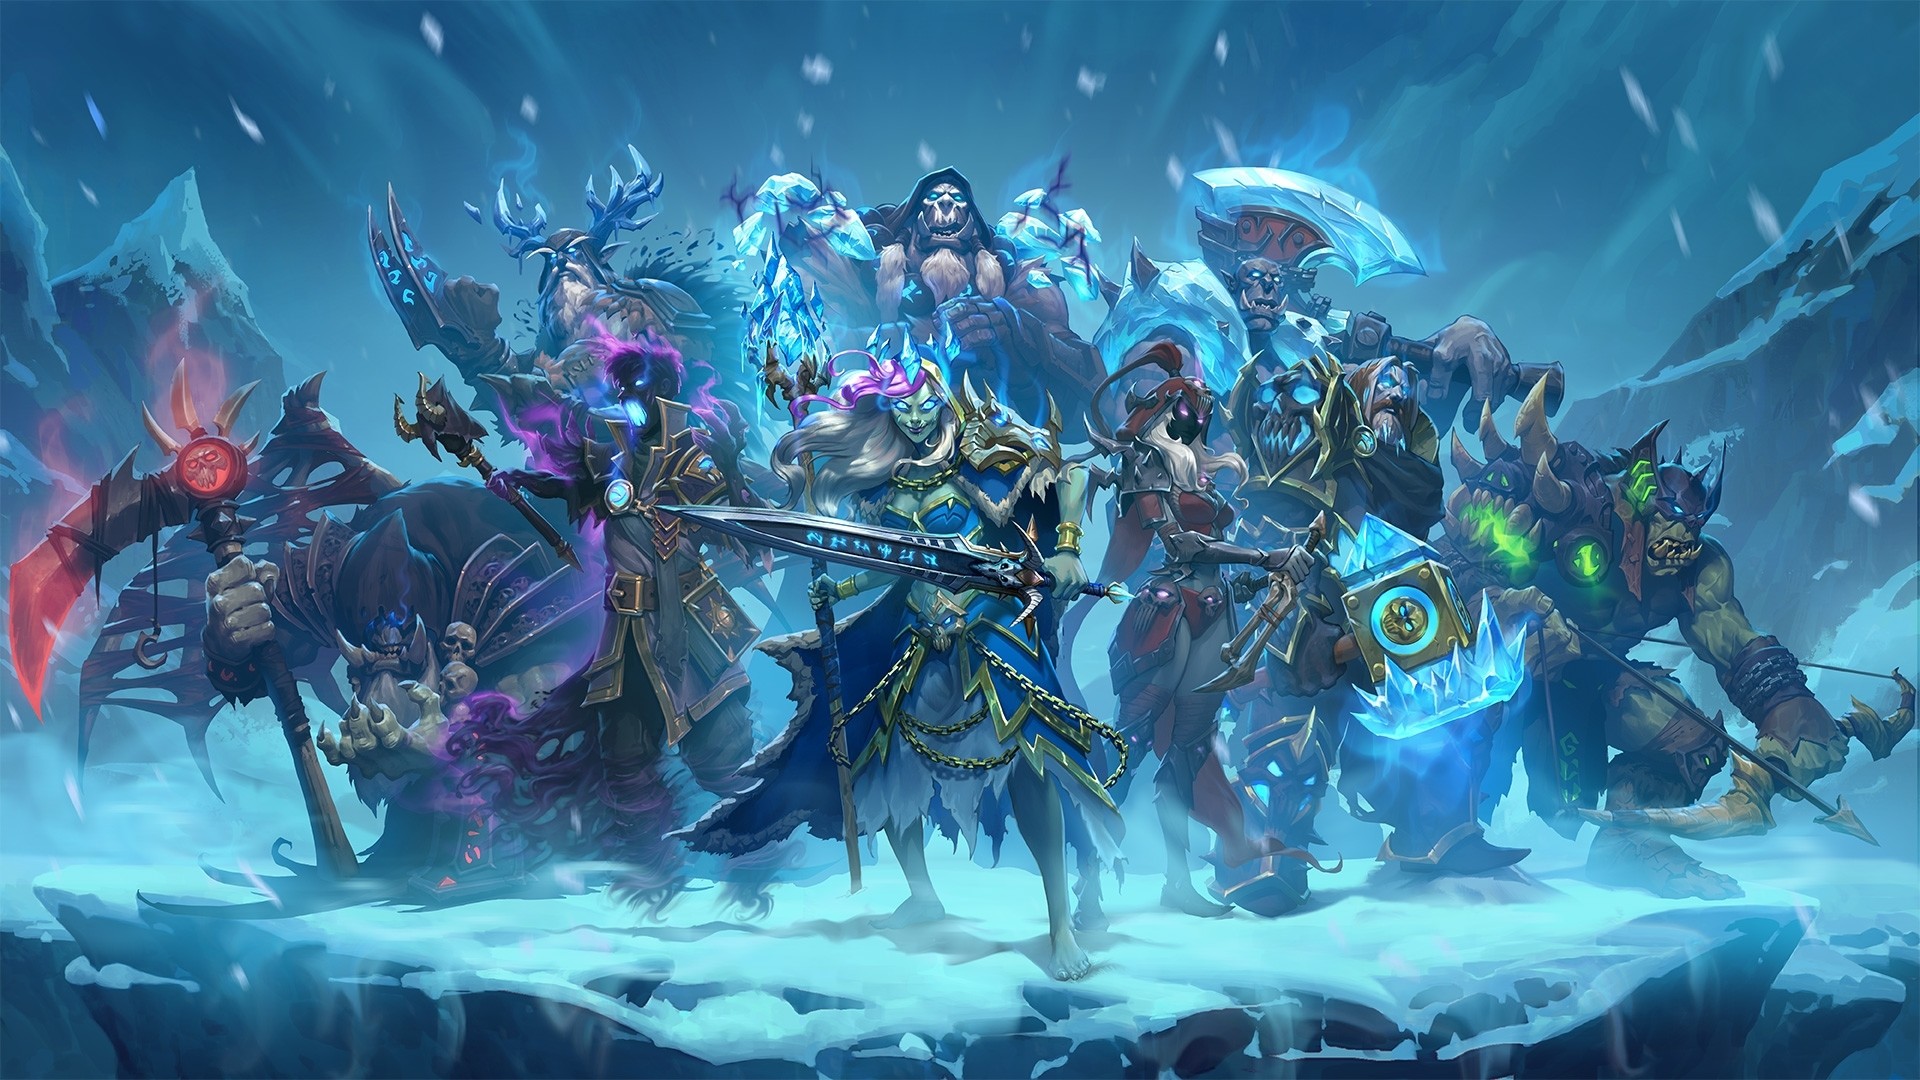 1920x1080 Title : knights of the frozen throne wallpapers – hearthstone top decks.  Dimension : 1920 x 1080. File Type : JPG/JPEG